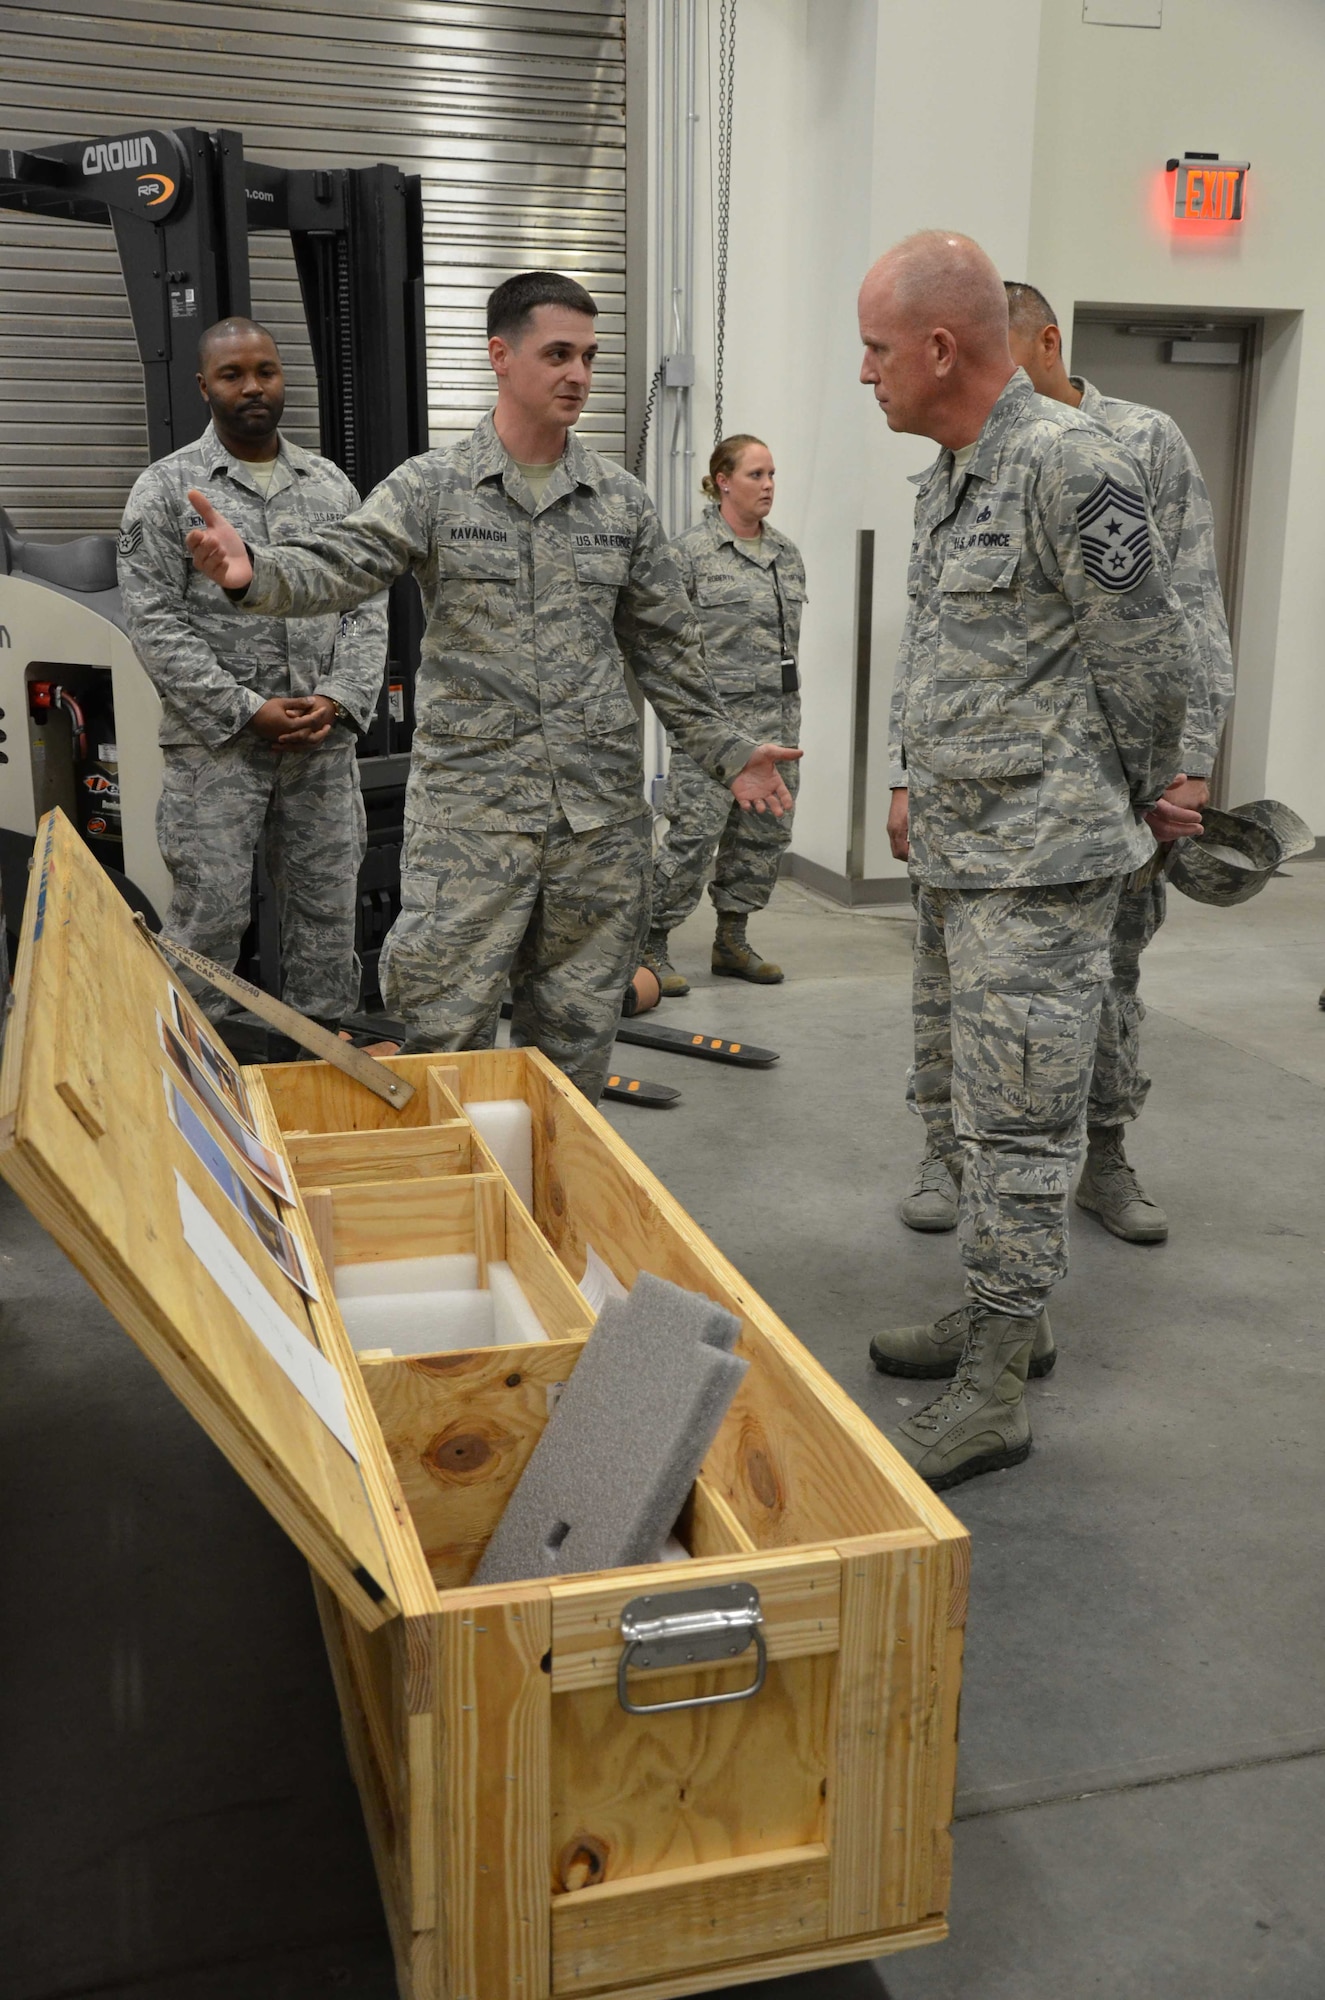 Tech. Sgt. Timothy Kavanagh, noncommissioned officer-in-charge of product support for the Air Force Technical Applications Center, Patrick AFB, Fla., explains to Chief Master Sgt. Frank Batten, command chief of Air Combat Command, how he designed a crate to better ship, house and store AFTAC's precision seismic equipment that is used to monitor worldwide nuclear activity.  (U.S. Air Force photo by Susan A. Romano)